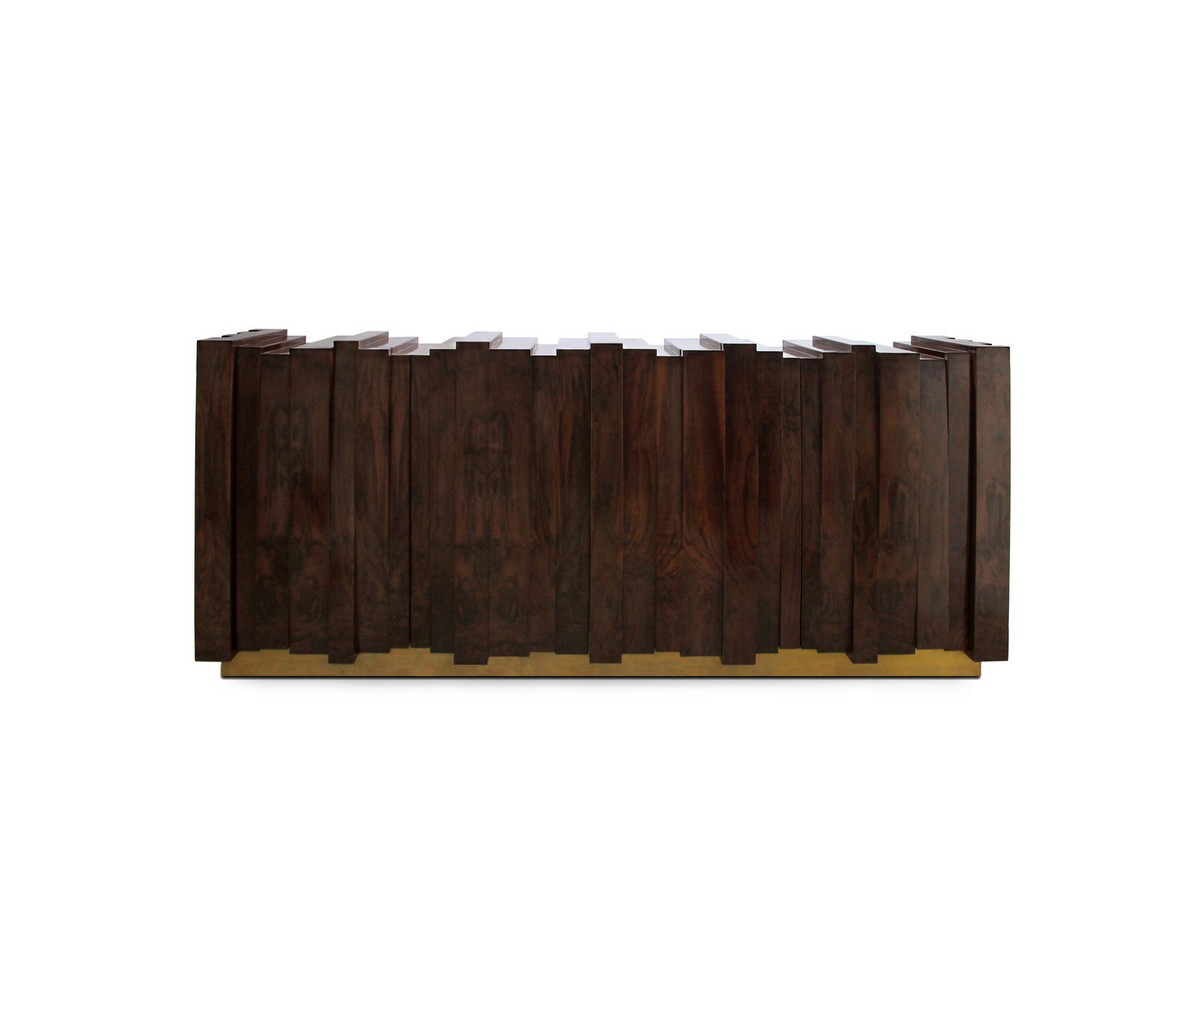 Covet House Stocklist: New Sideboard Entries